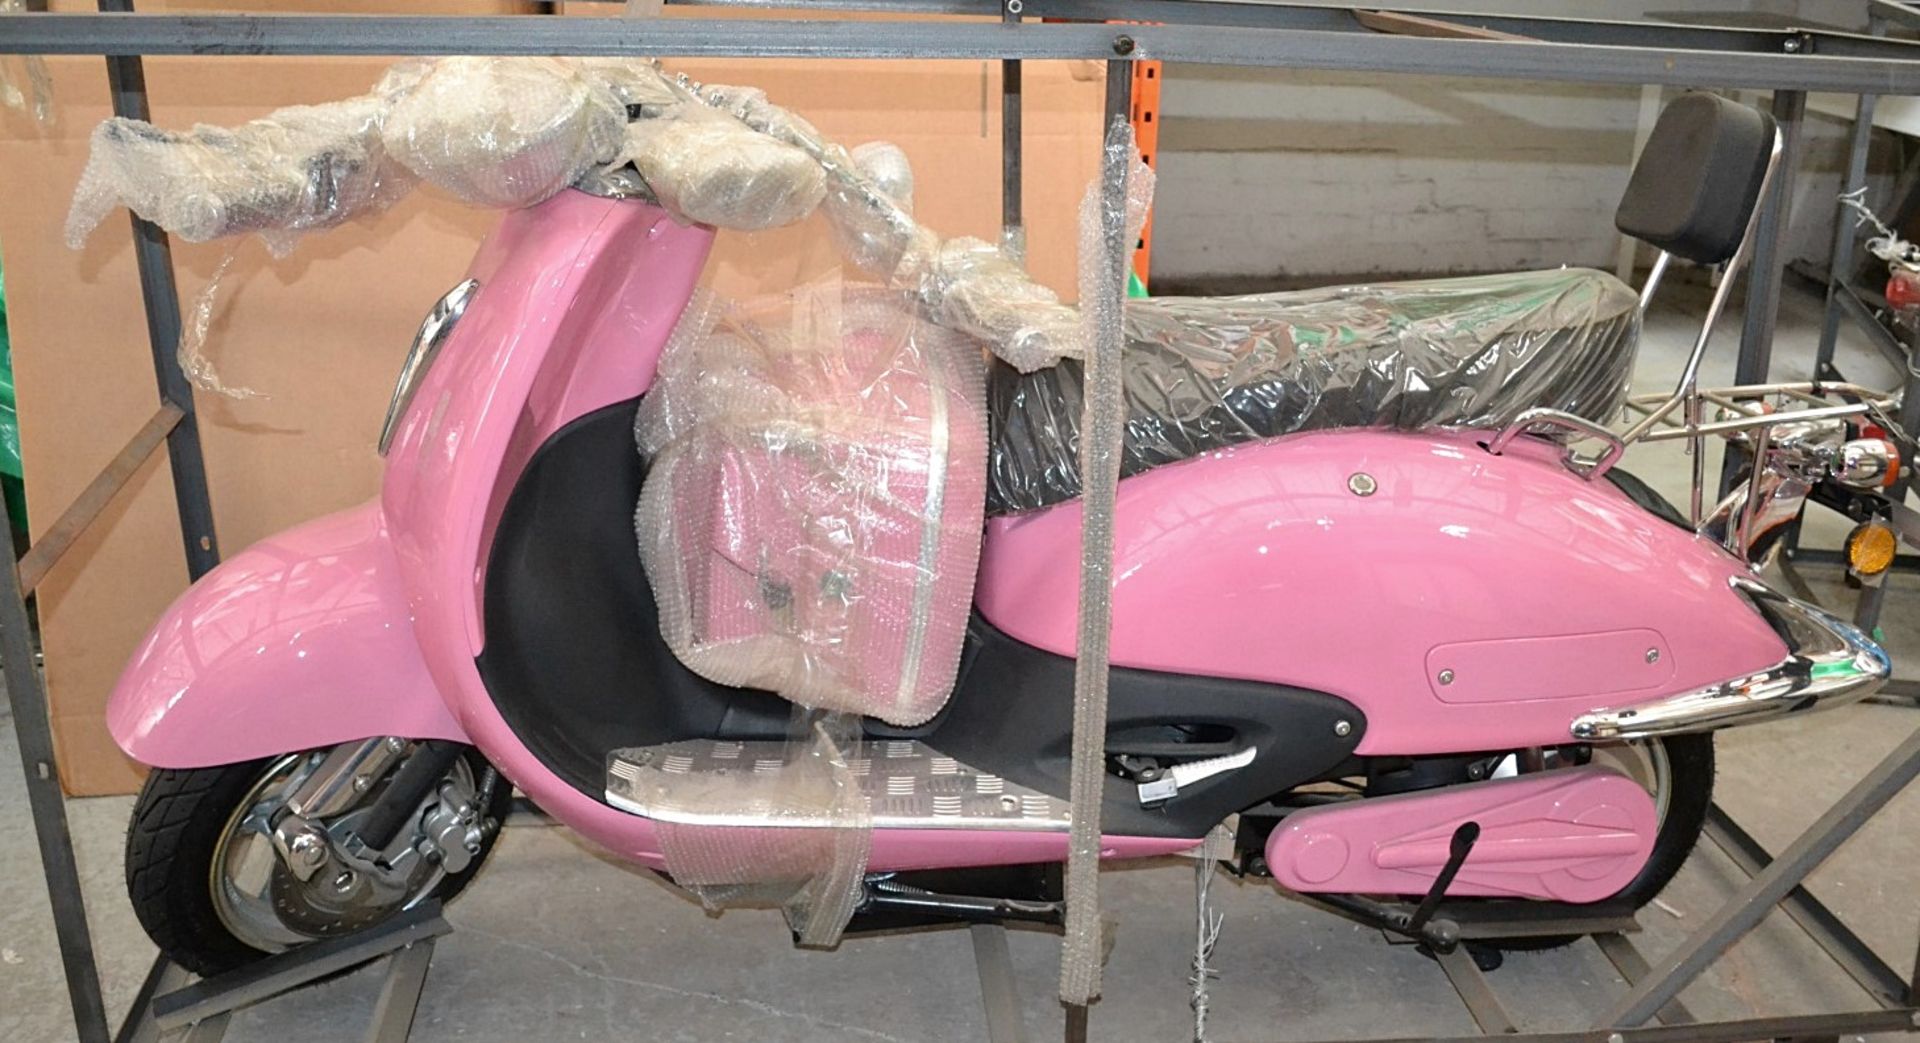 1 x MTL 1500 TDR Electric Scooter In PINK - New/Unused Stock - CL011 - Location: Altrincham WA14 - Image 7 of 15